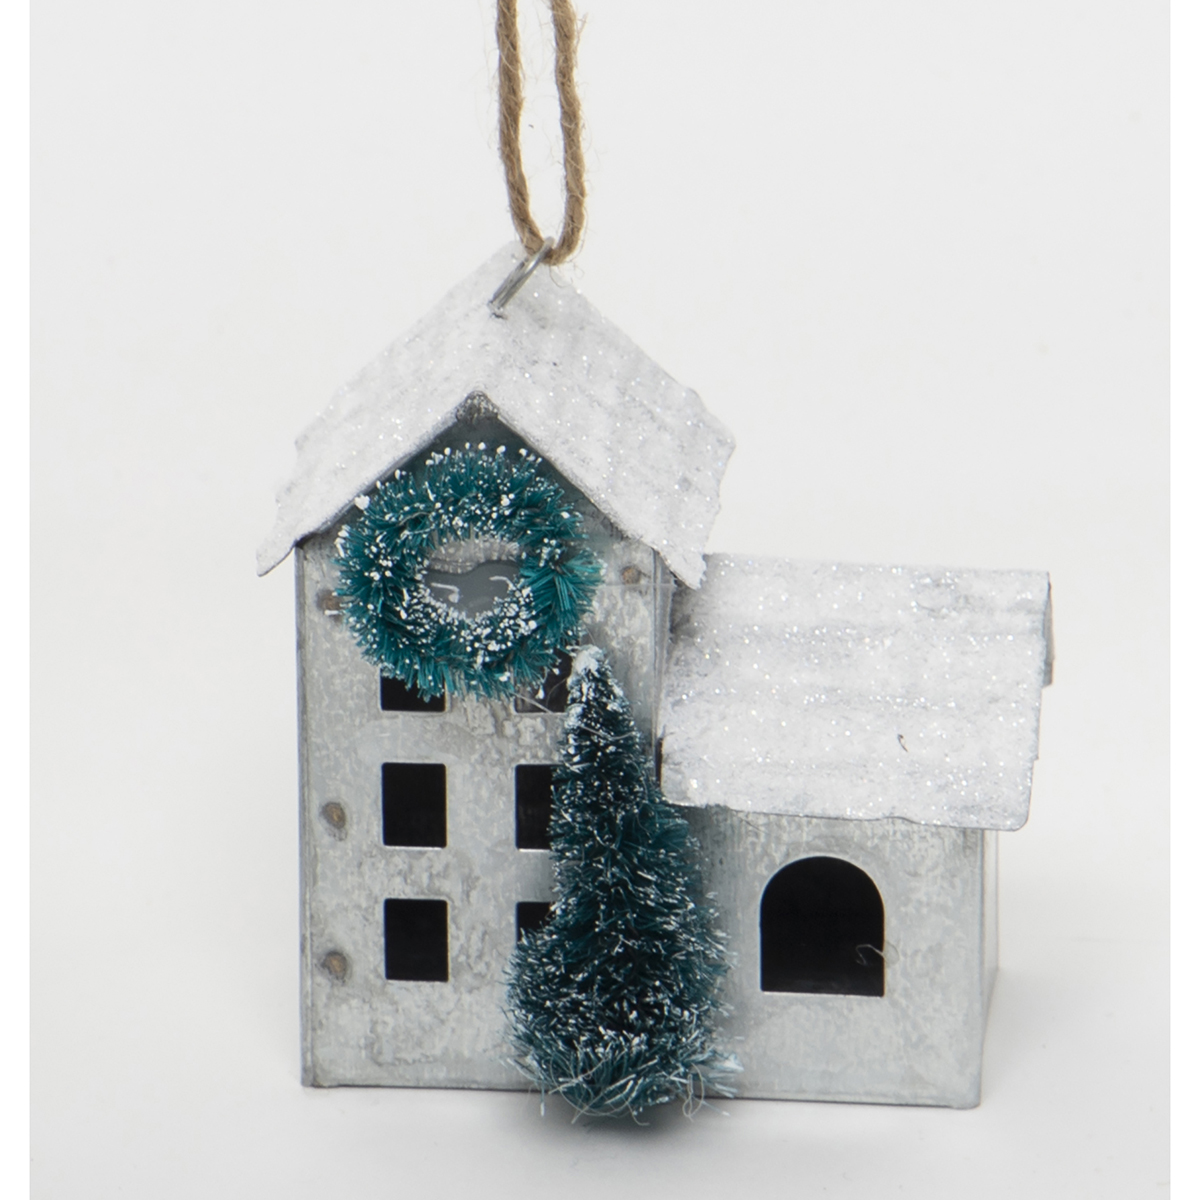 !METAL HOUSE ORNAMENT WITH WHITE GLITTER b50